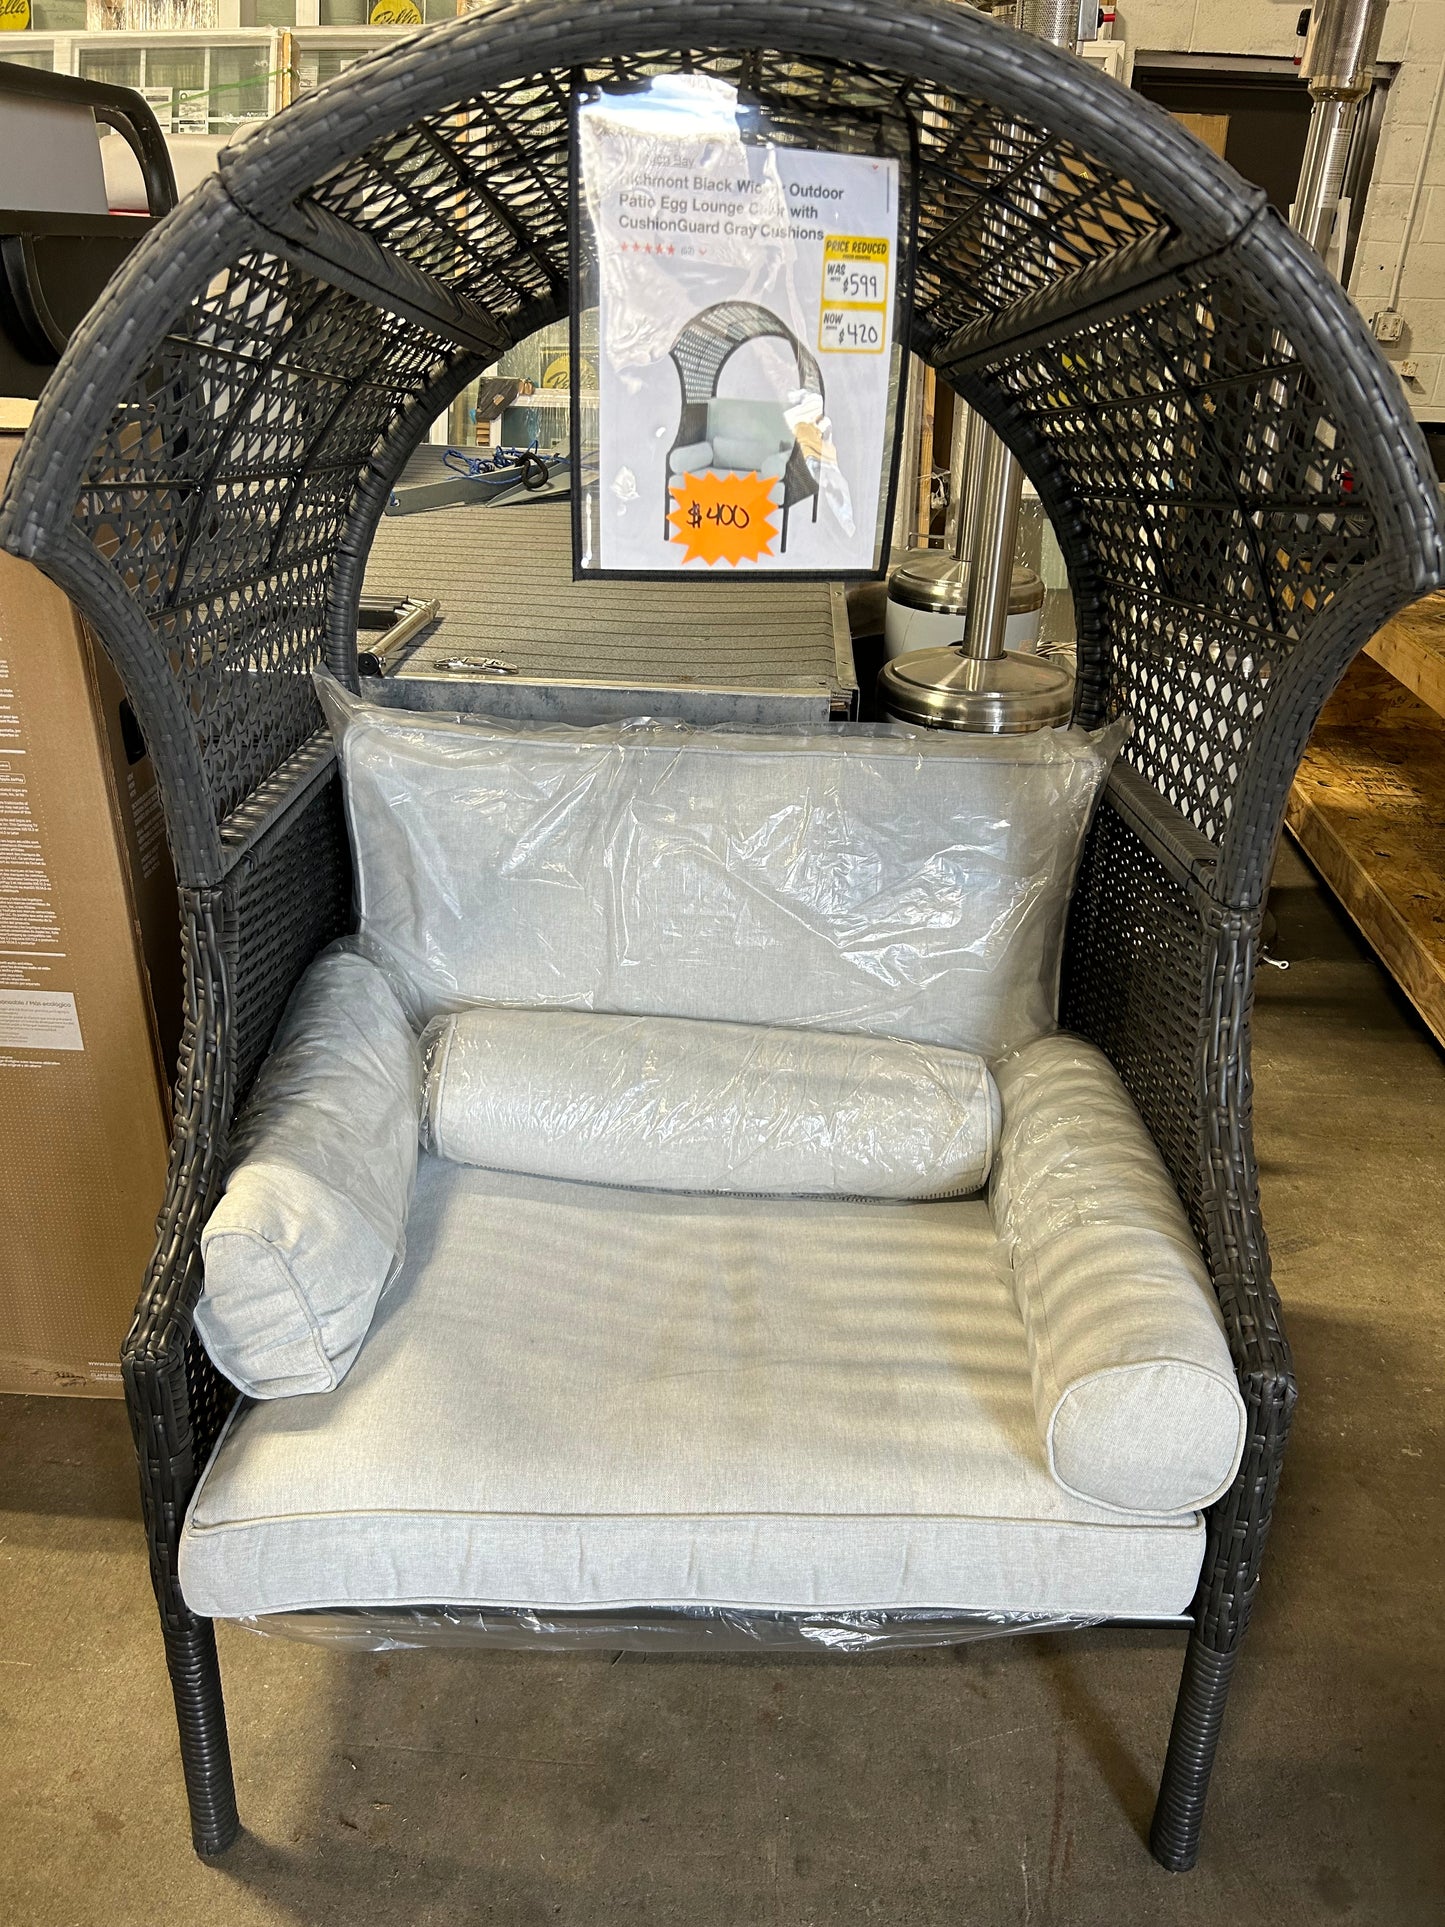 Richmont Black Wicker Outdoor Patio Egg Lounge Chair with CushionGuard Gray Cushions